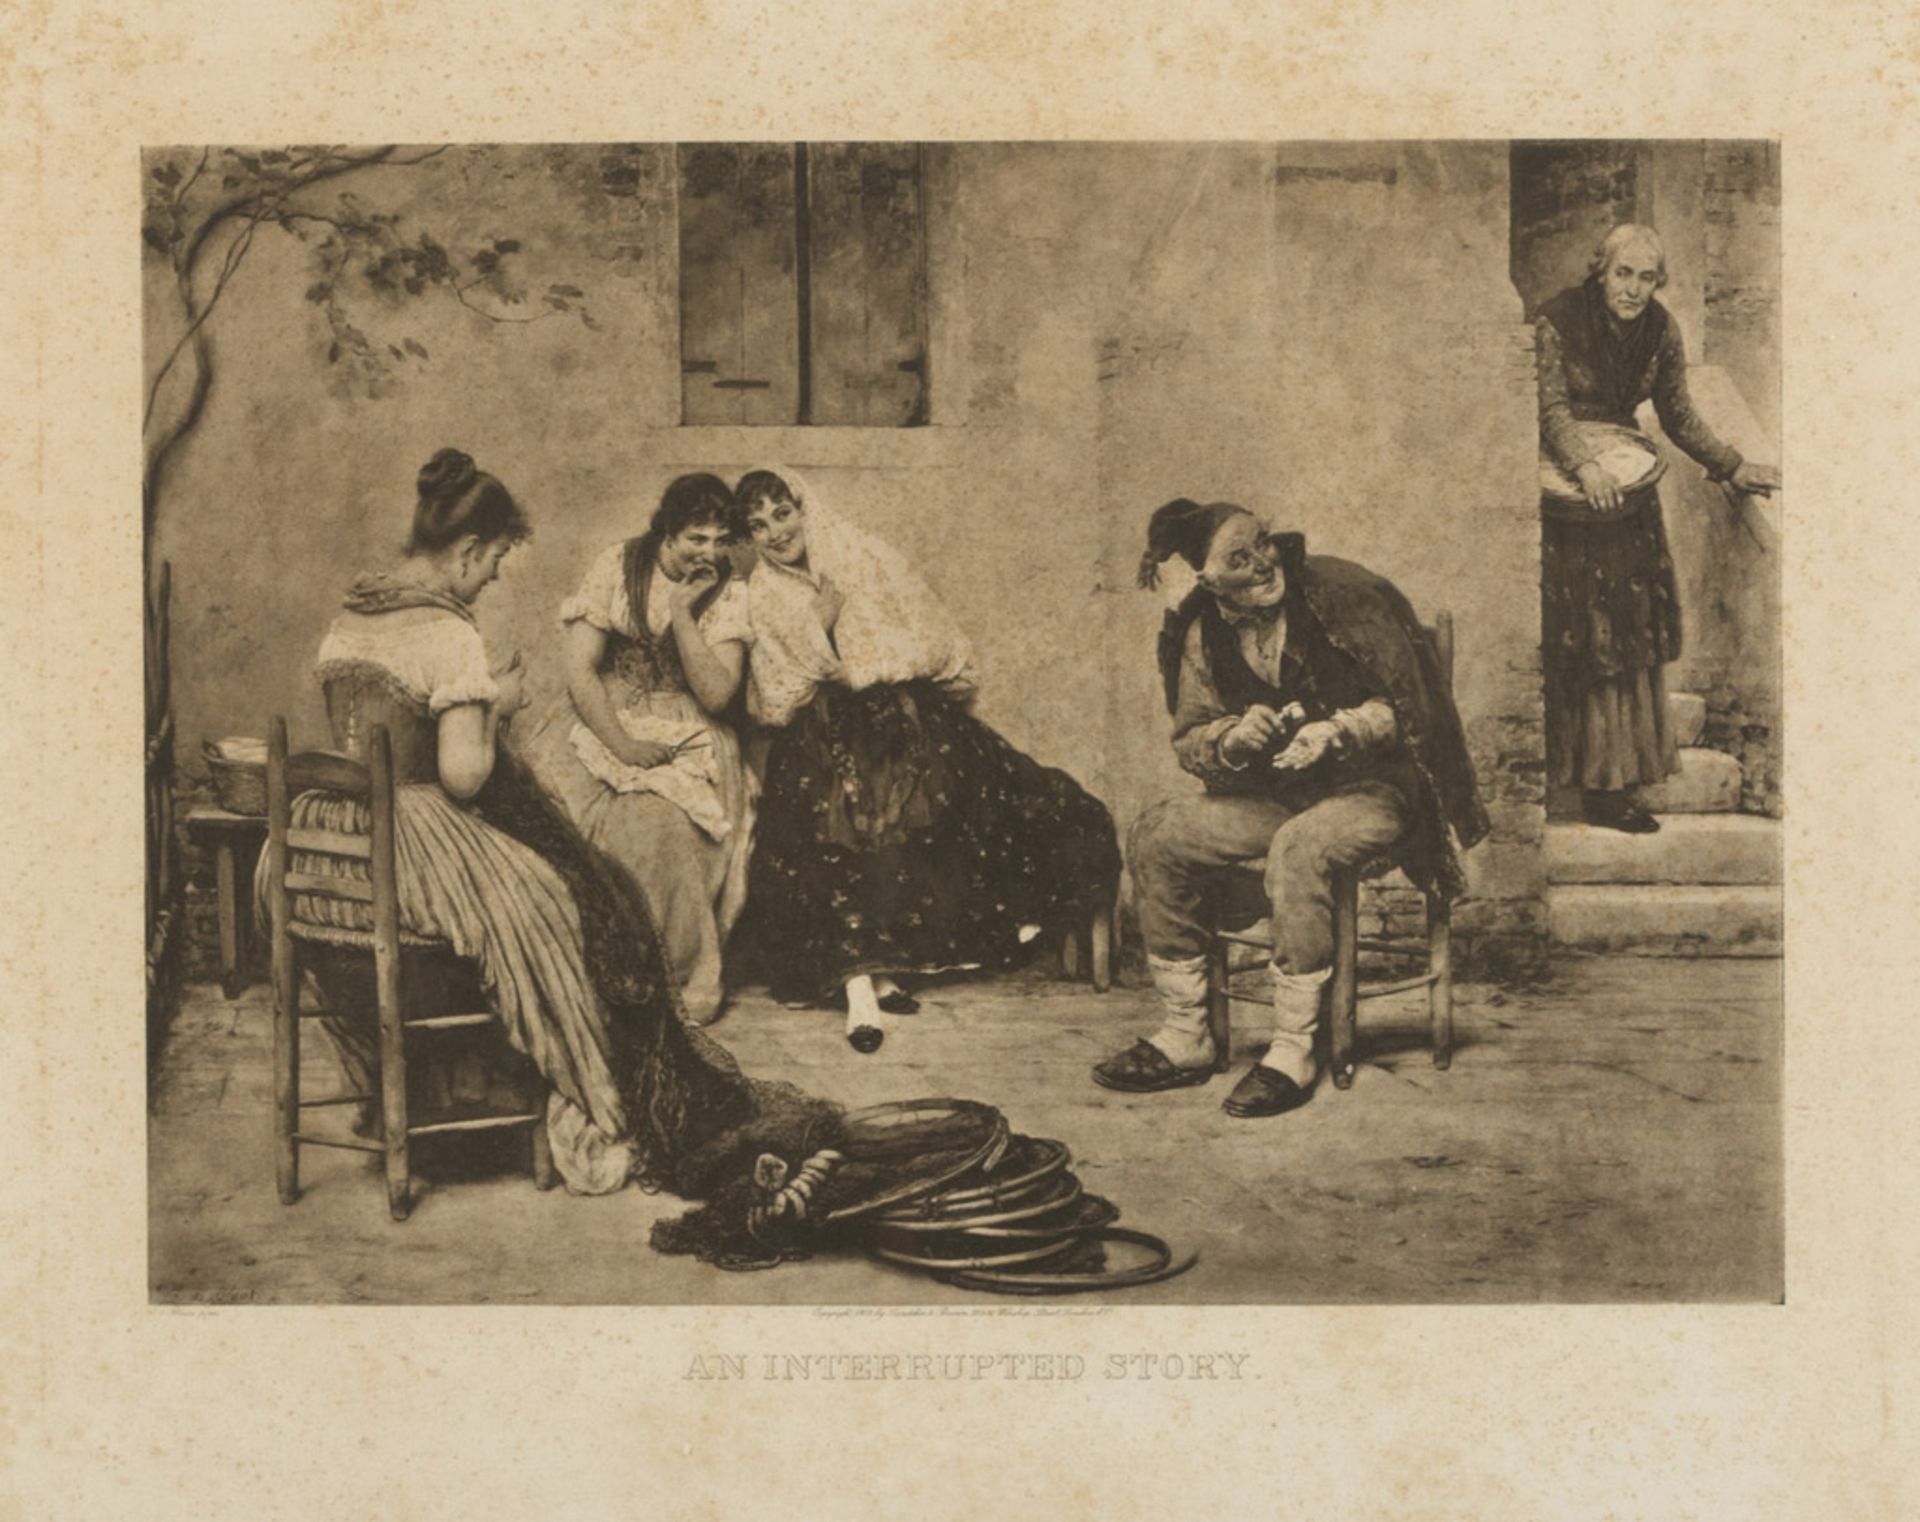 ENGLISH ENGRAVER, LATE 19TH CENTURY AN INTERRUPTED STORY, AFTER VON BLAAS Monochrome print, cm. 48 x